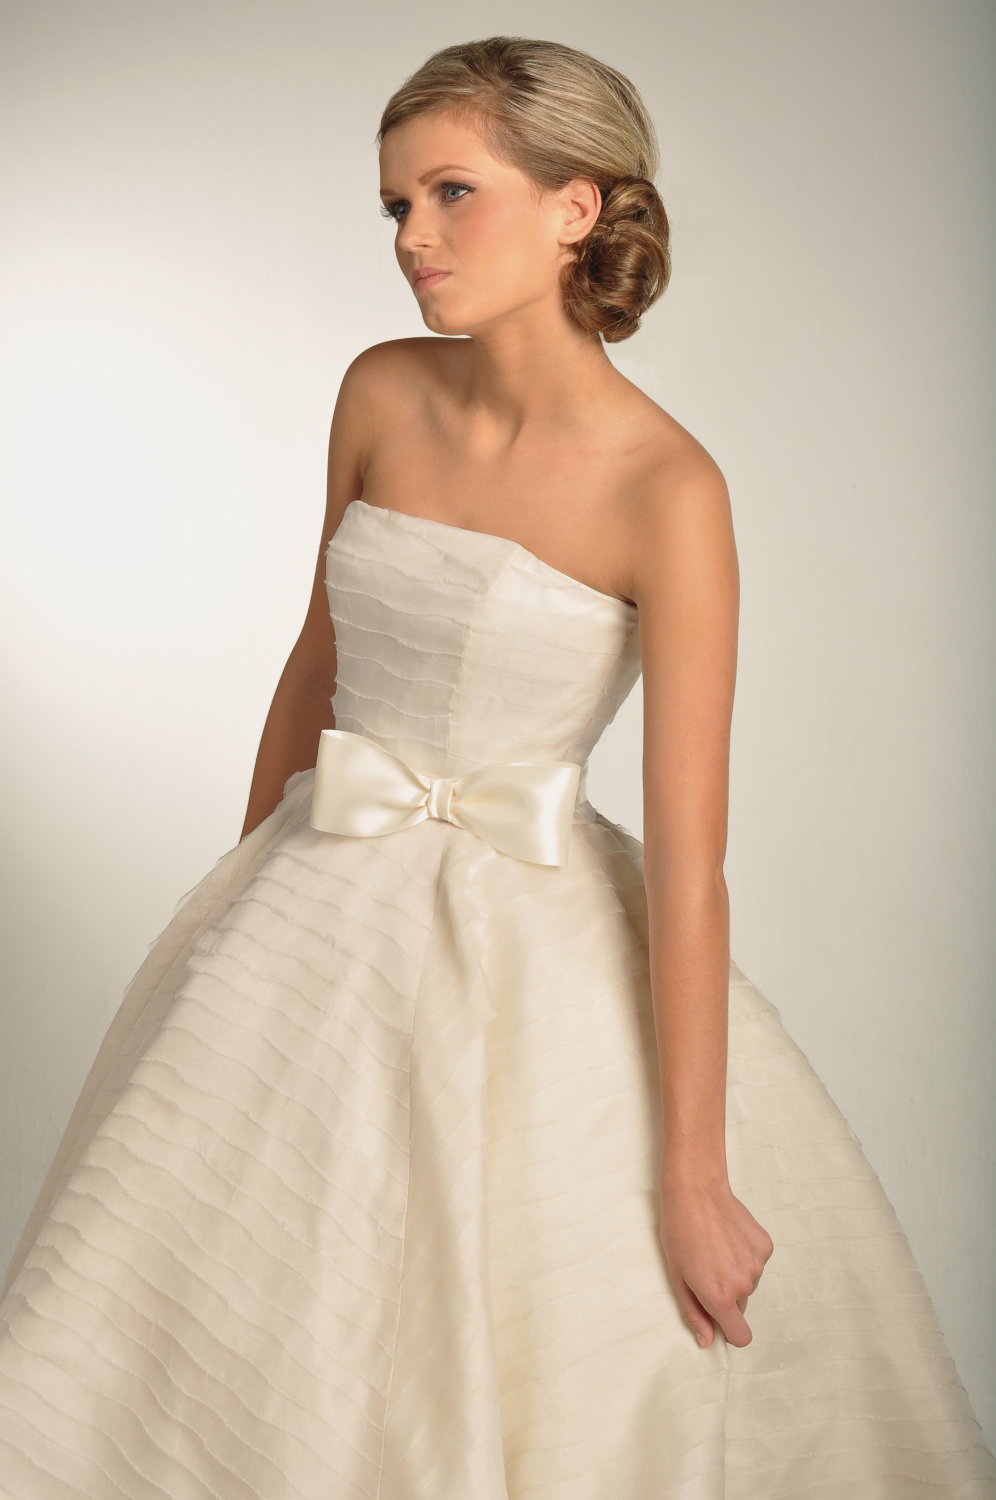 Top Ivory Wedding Dress With White Groom Shirt of the decade Don t miss out 